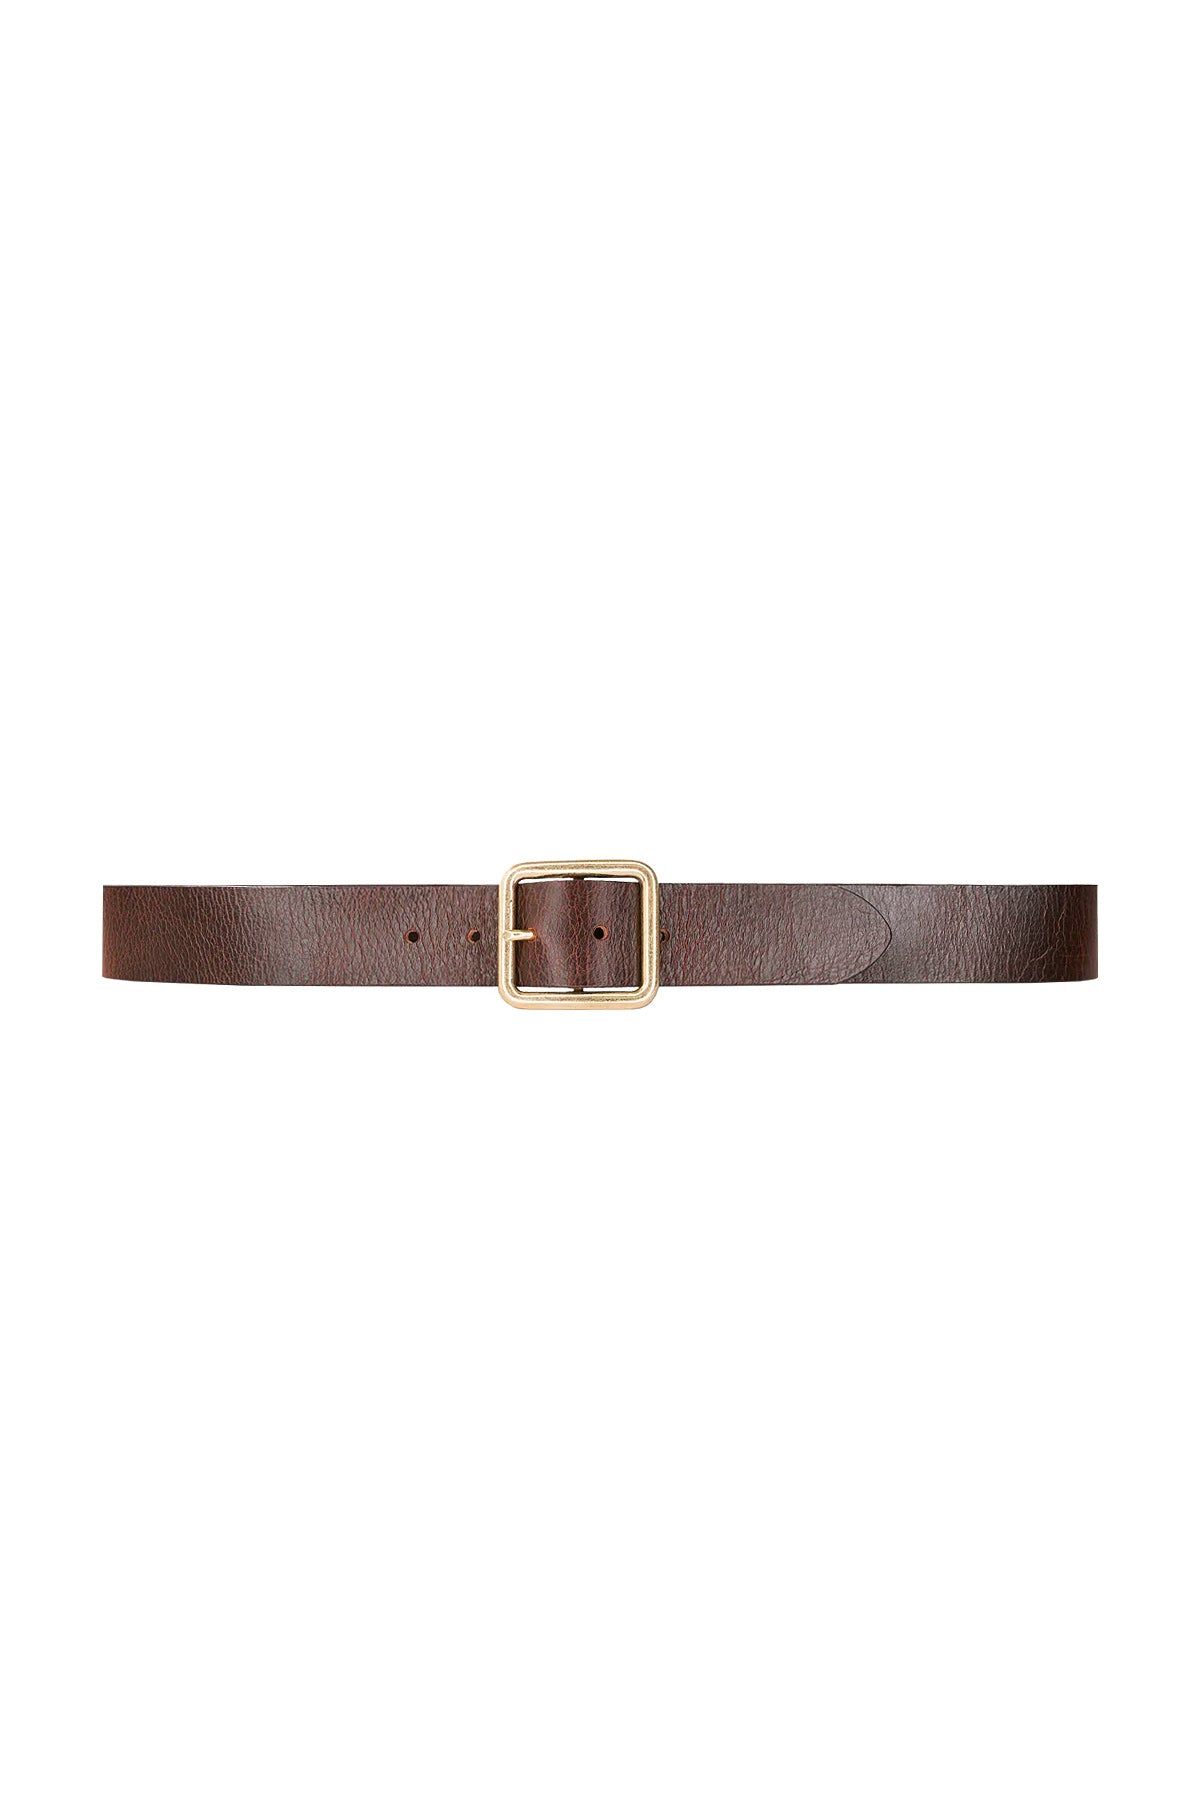 1.5" Chocolate Leather Band with Gold Buckle